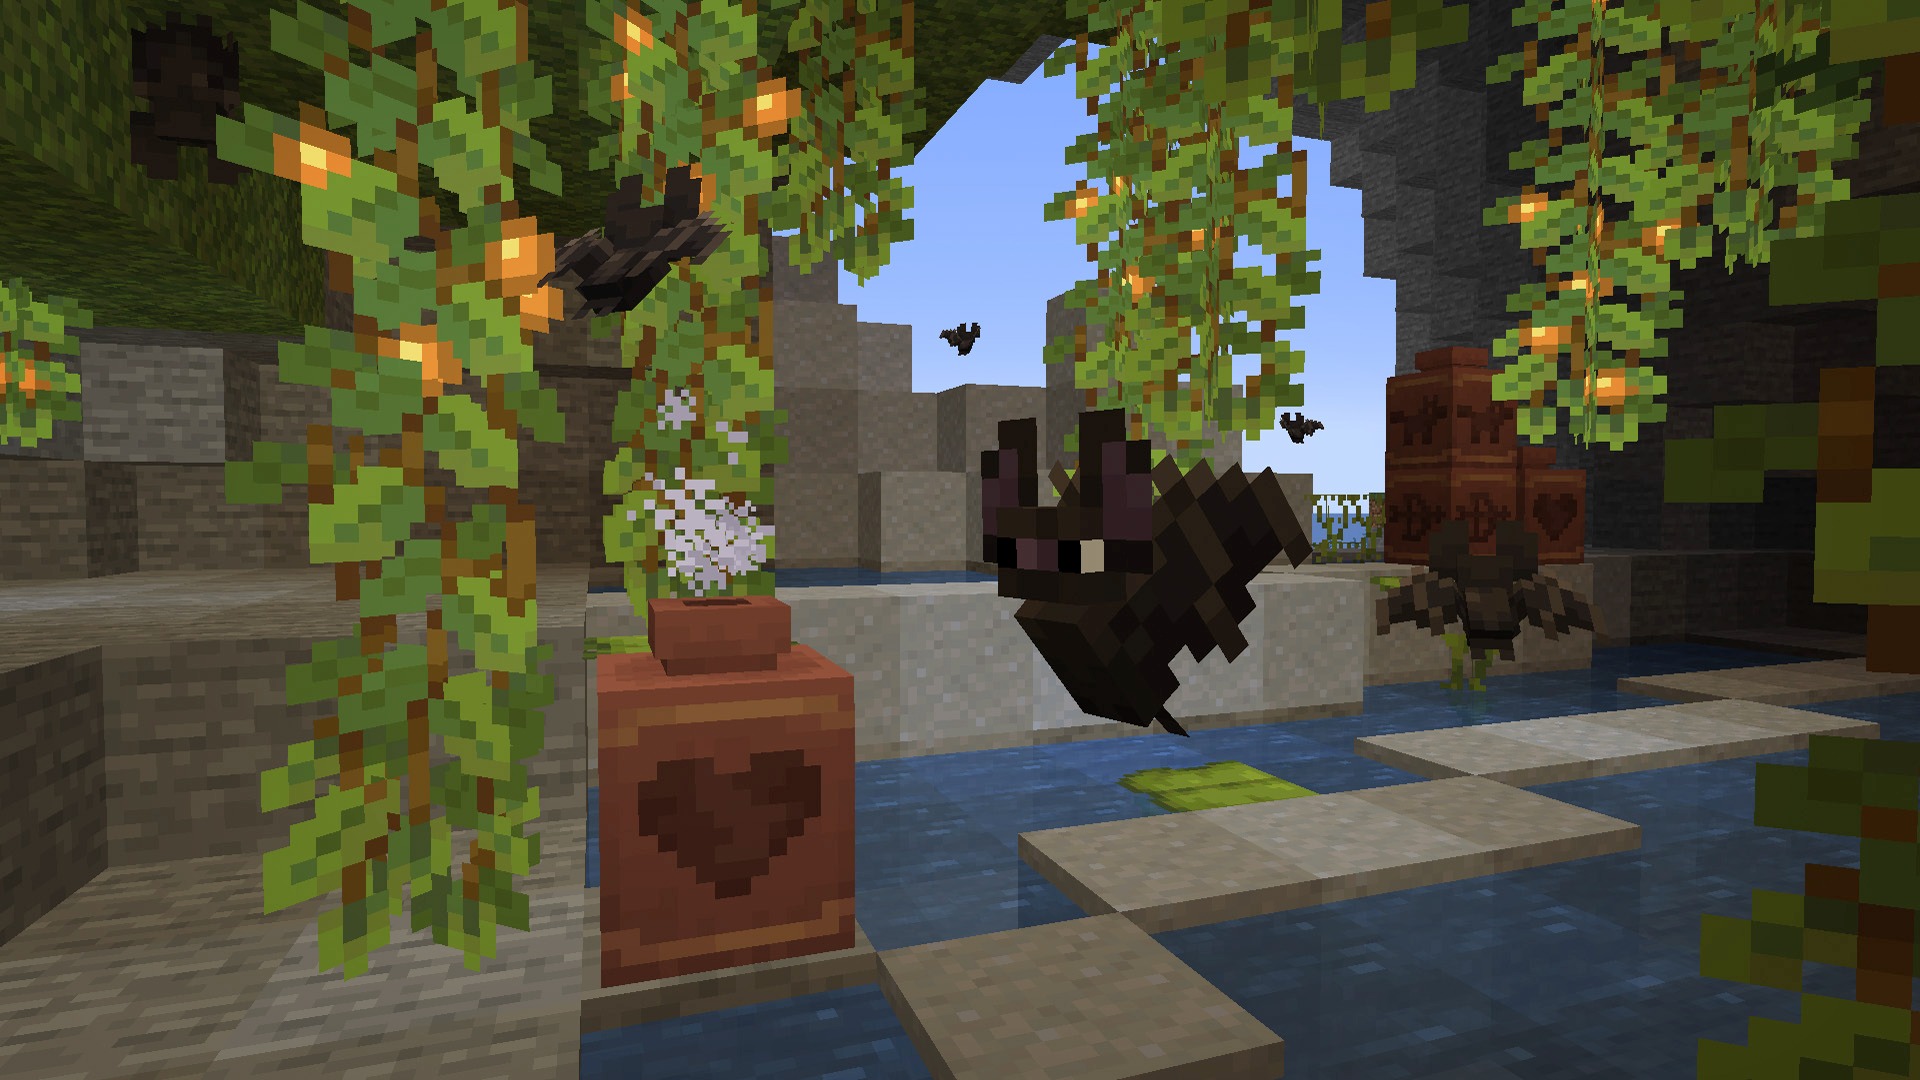 latest-minecraft-updates-give-decorative-pots-and-purpose-and-make-bats-look-more-minecraft-y-(and-cute)